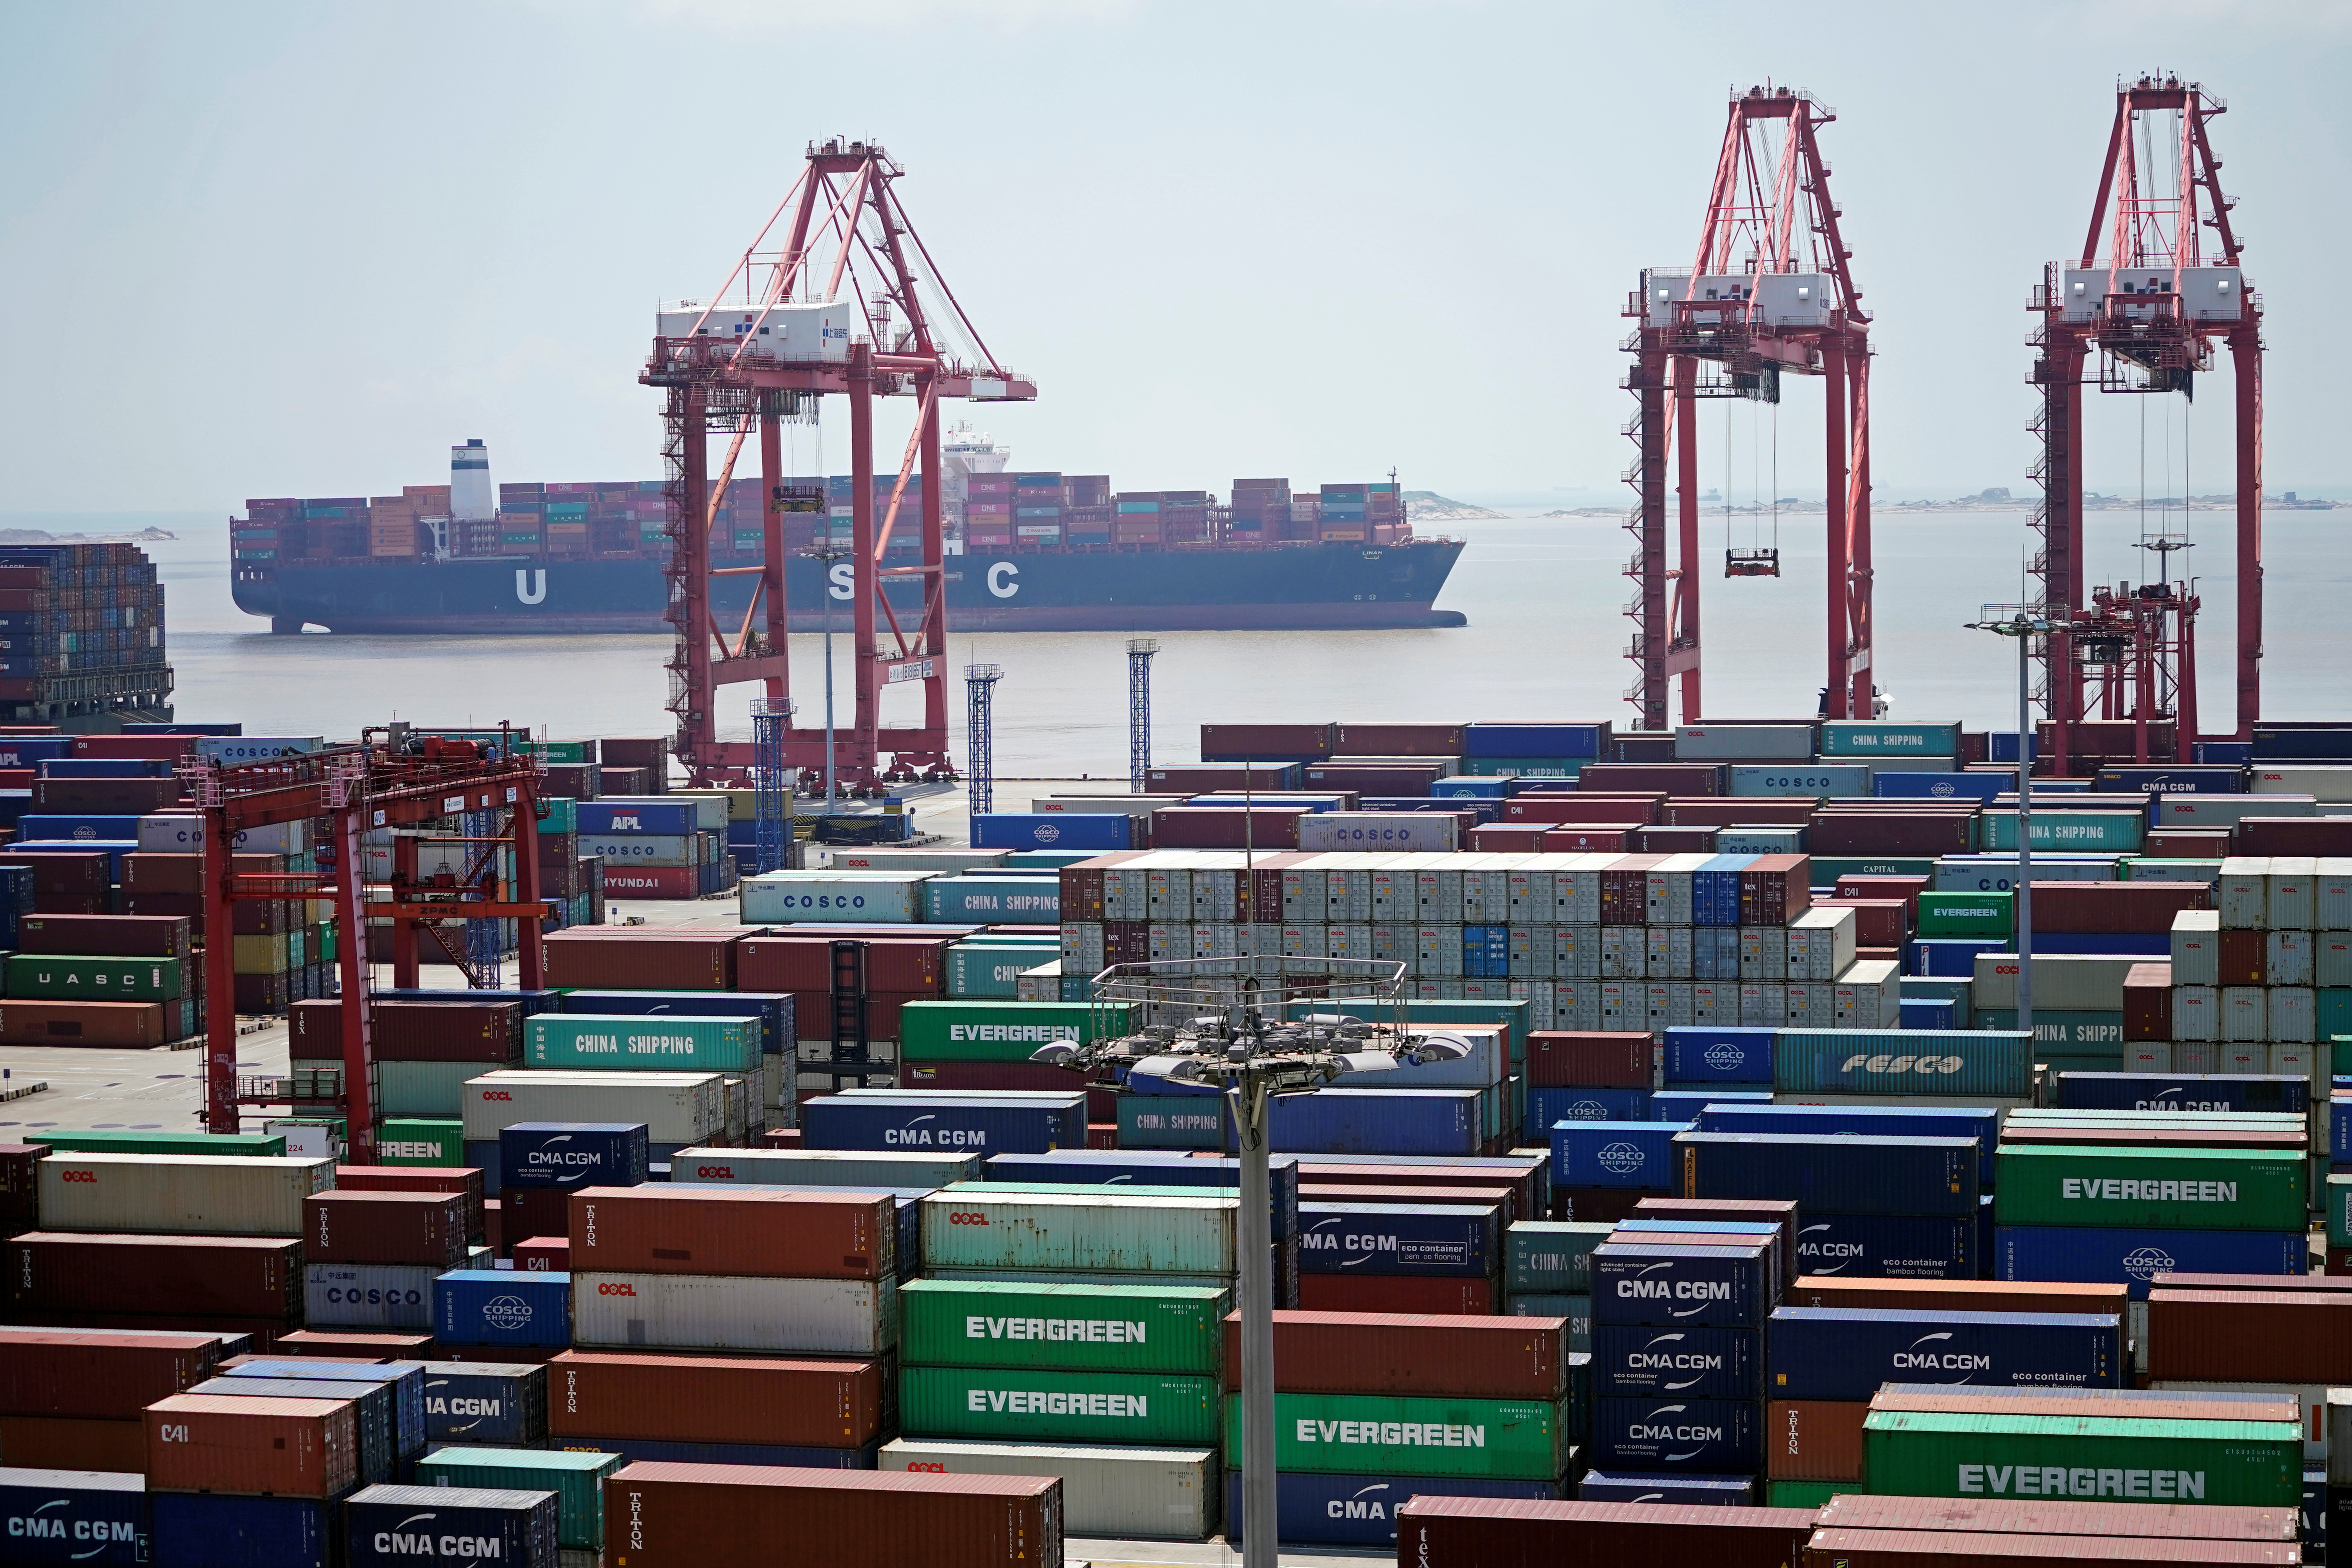 Containers are seen at the Yangshan Deep Water Port in Shanghai, China August 6, 2019. REUTERS/Aly Song